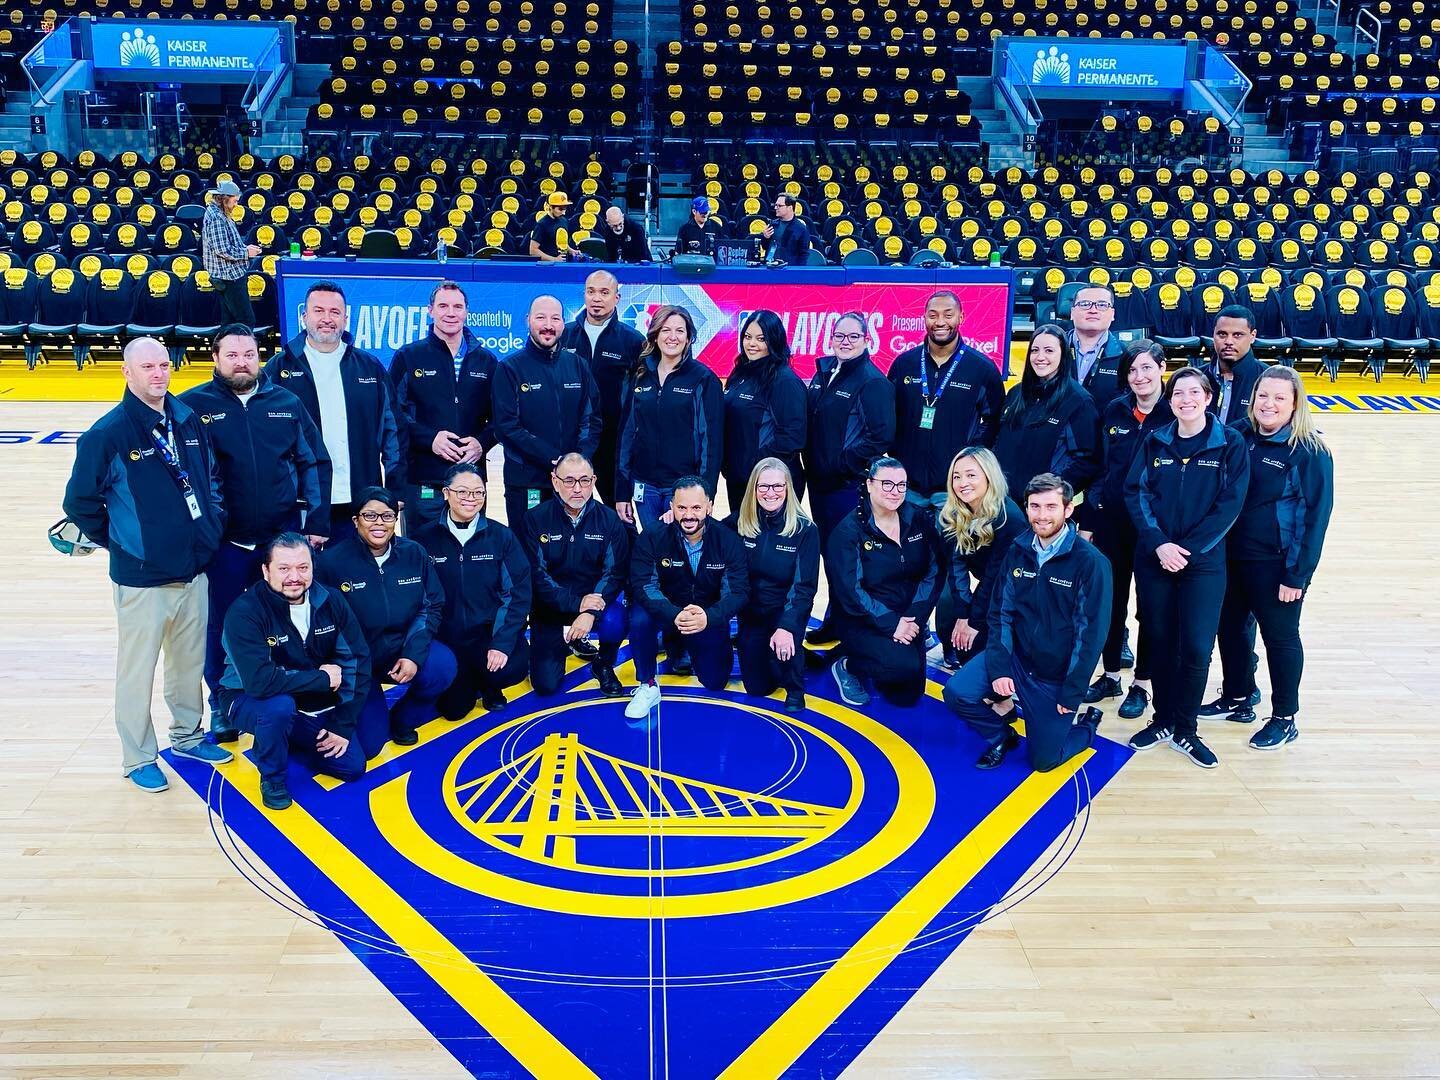 #BehindTheScenes with our culinary game changers 👏👏

✨Congrats, Team, on an incredible season 🏆🏆🏆🏆

#teamwork #culinarymagic #nbachampions #champions #warriors #chasecenter #tasteofchasecenter